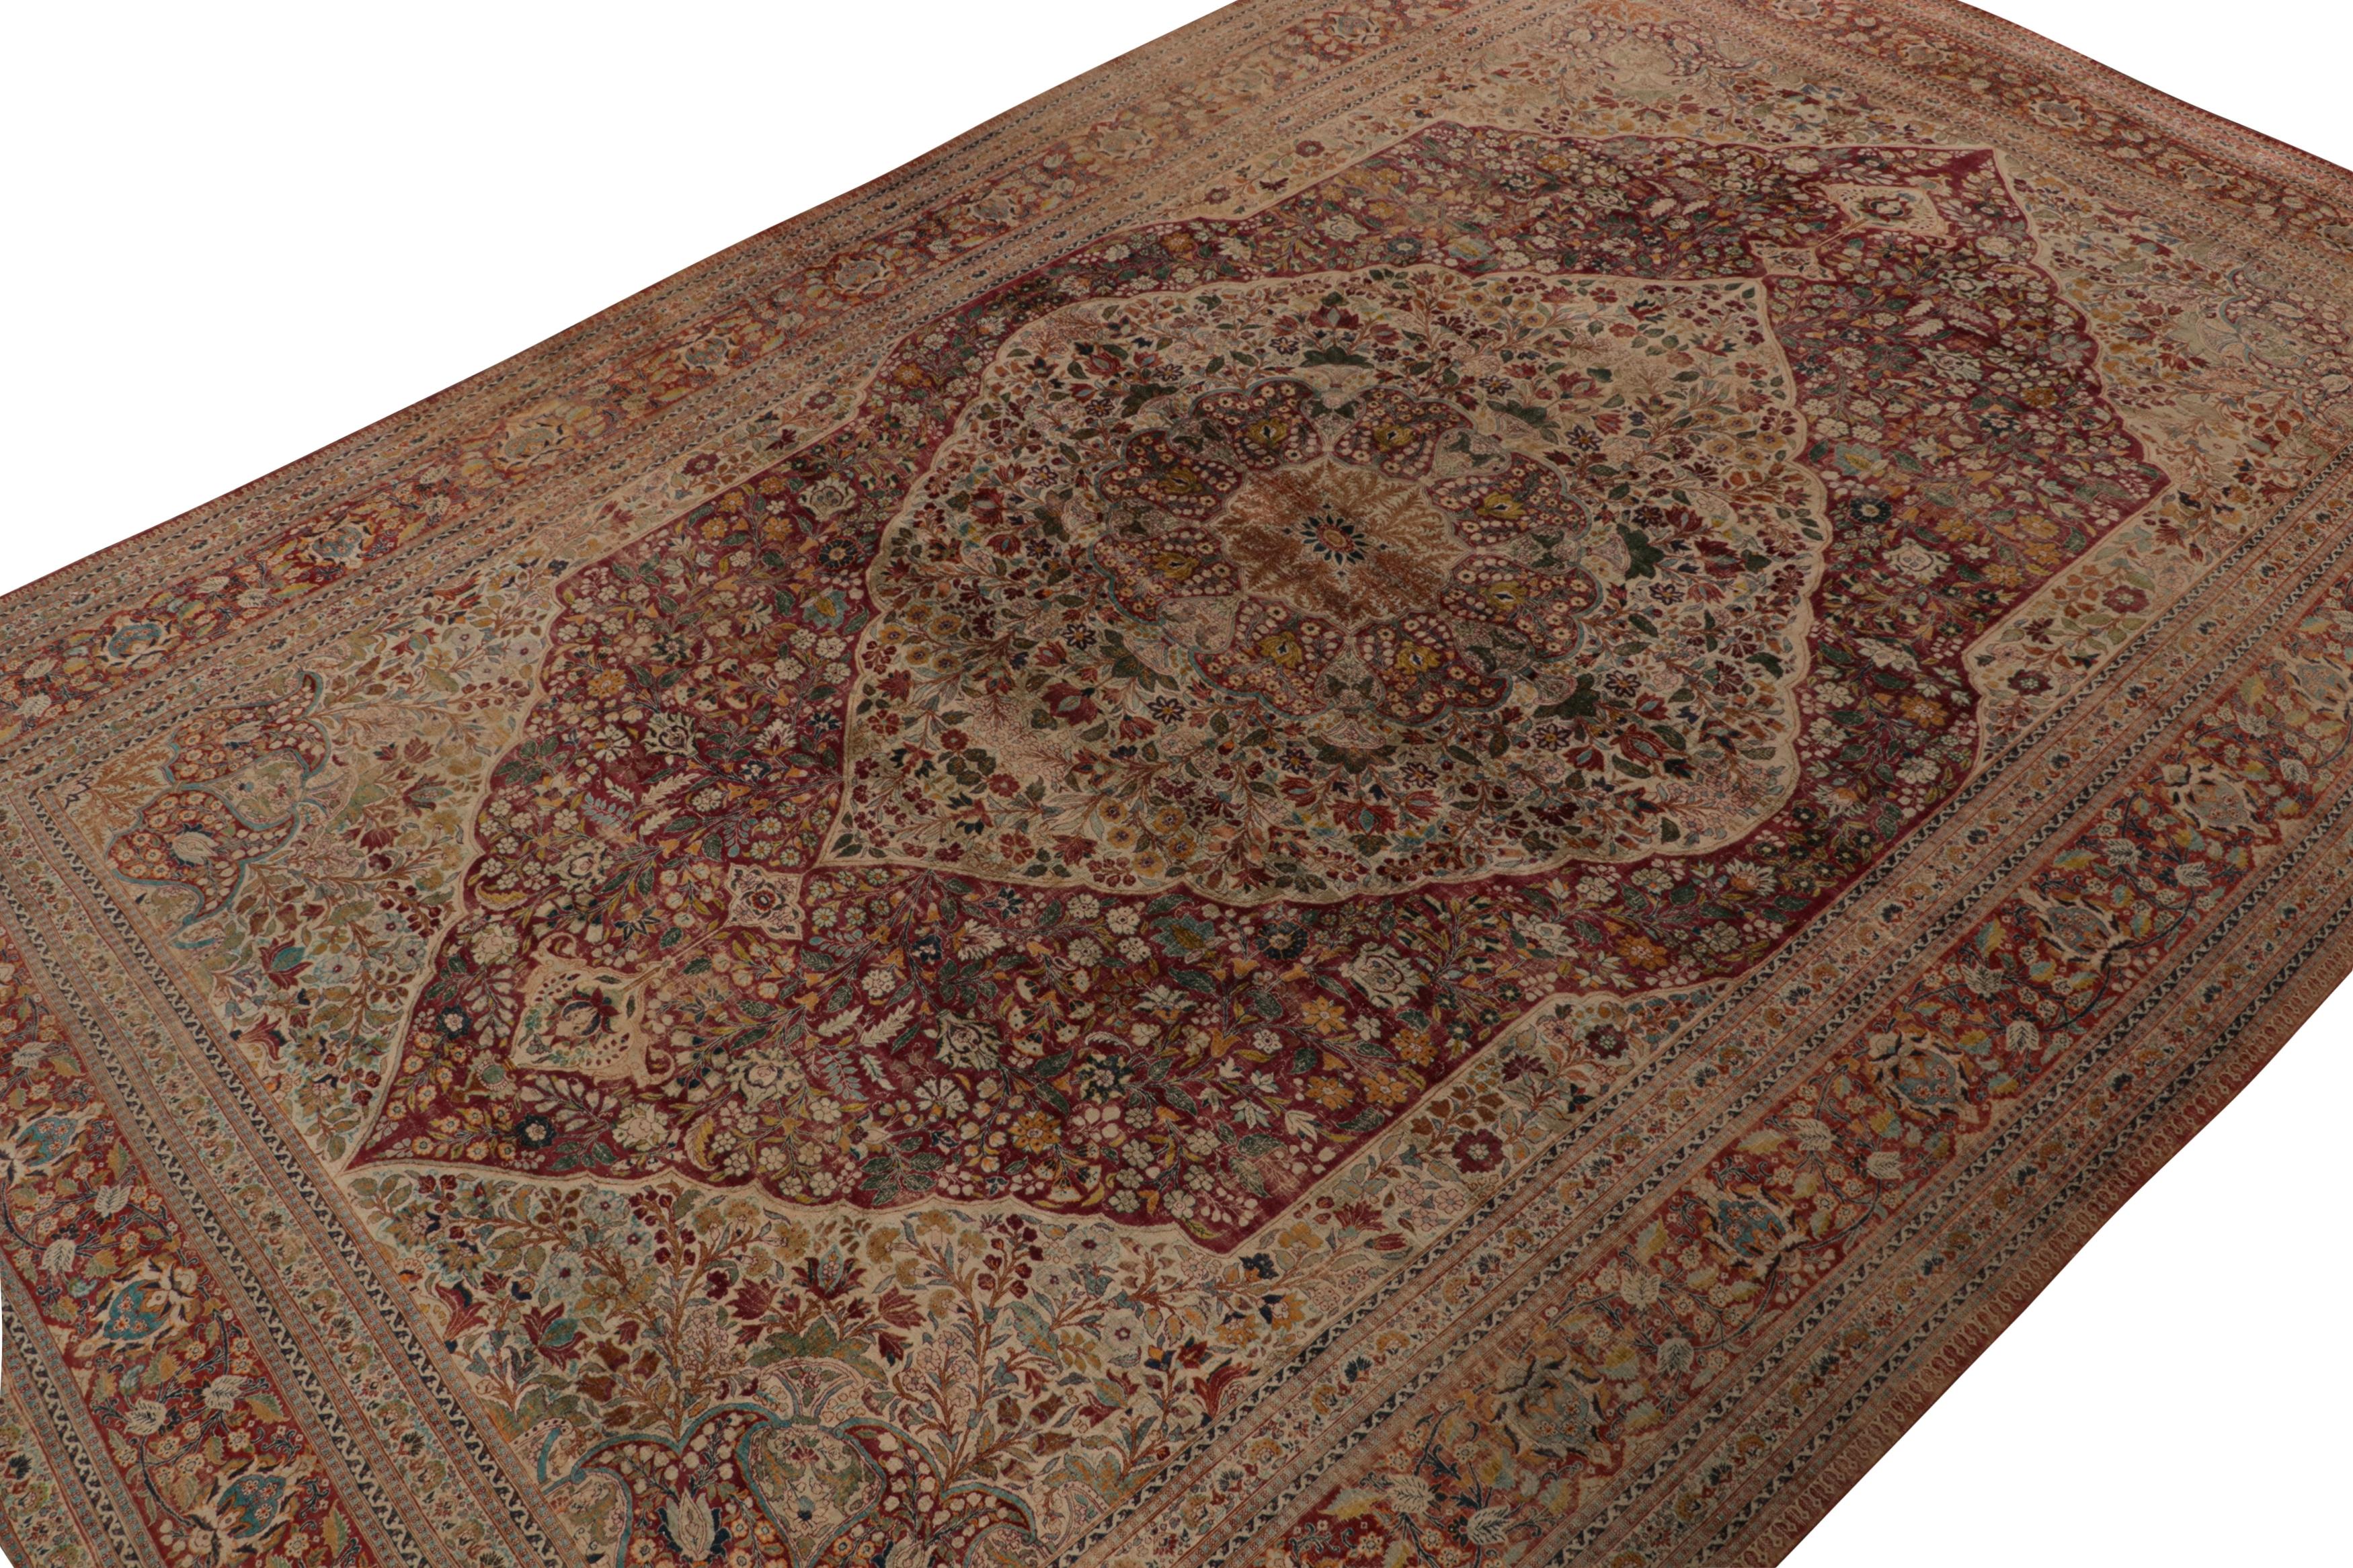 Hand-knotted in silk, this 12x18 antique Persian Tabriz oversized rug is an extremely rare piece from the works of Hadji Jalili, originating from circa 1860-1870. Its design features detailed court designs, in dense all-over floral patterns and